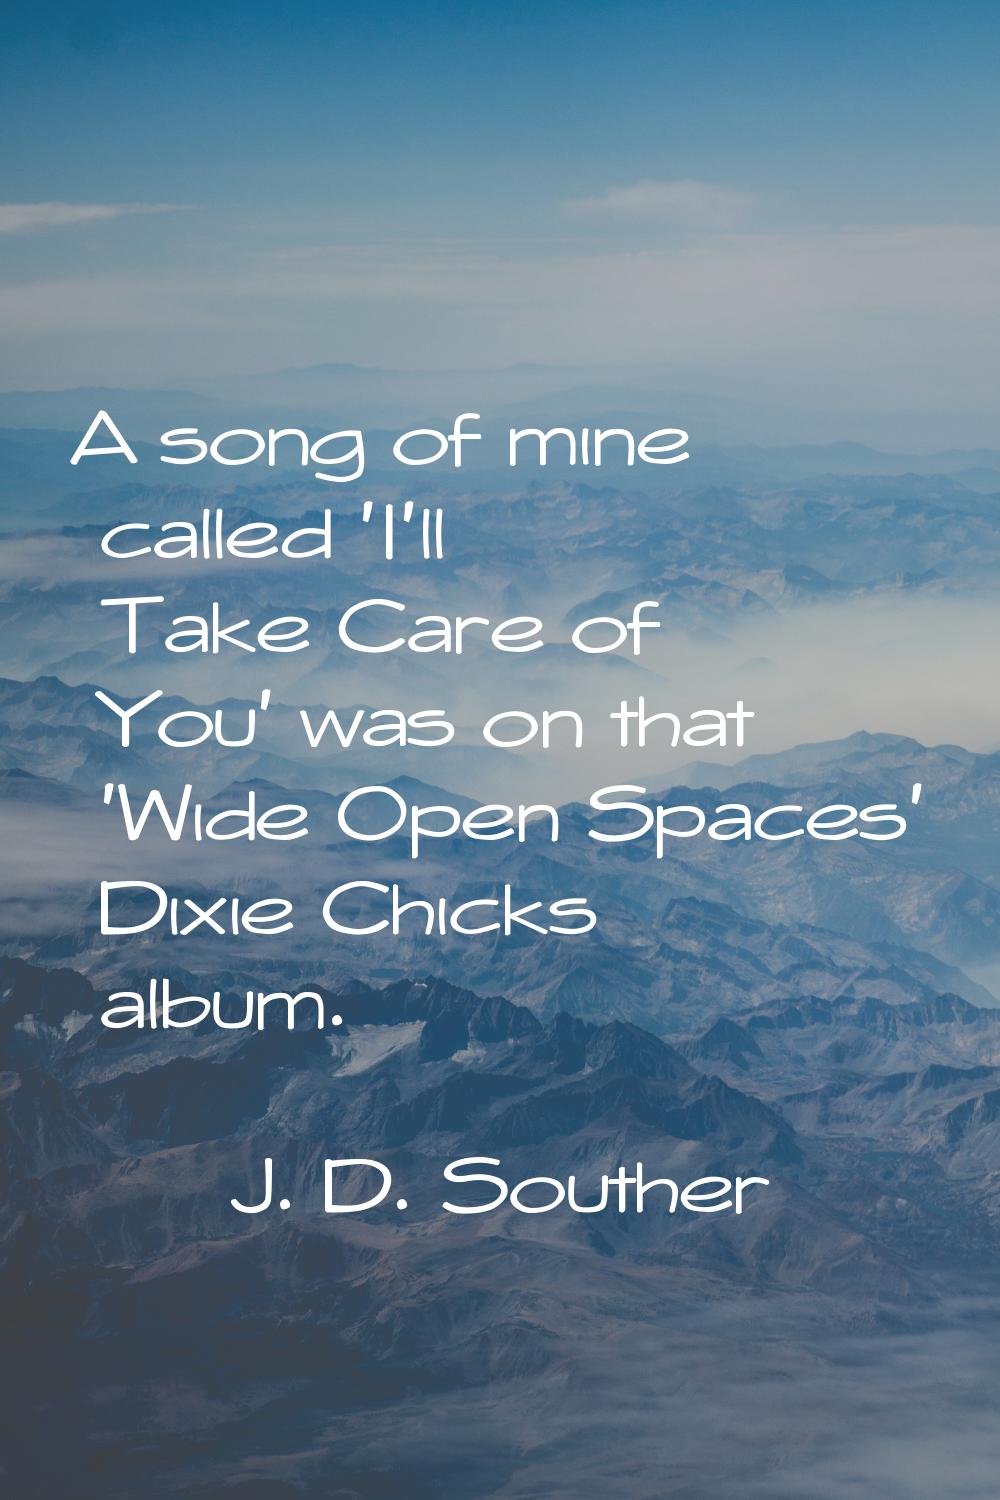 A song of mine called 'I'll Take Care of You' was on that 'Wide Open Spaces' Dixie Chicks album.